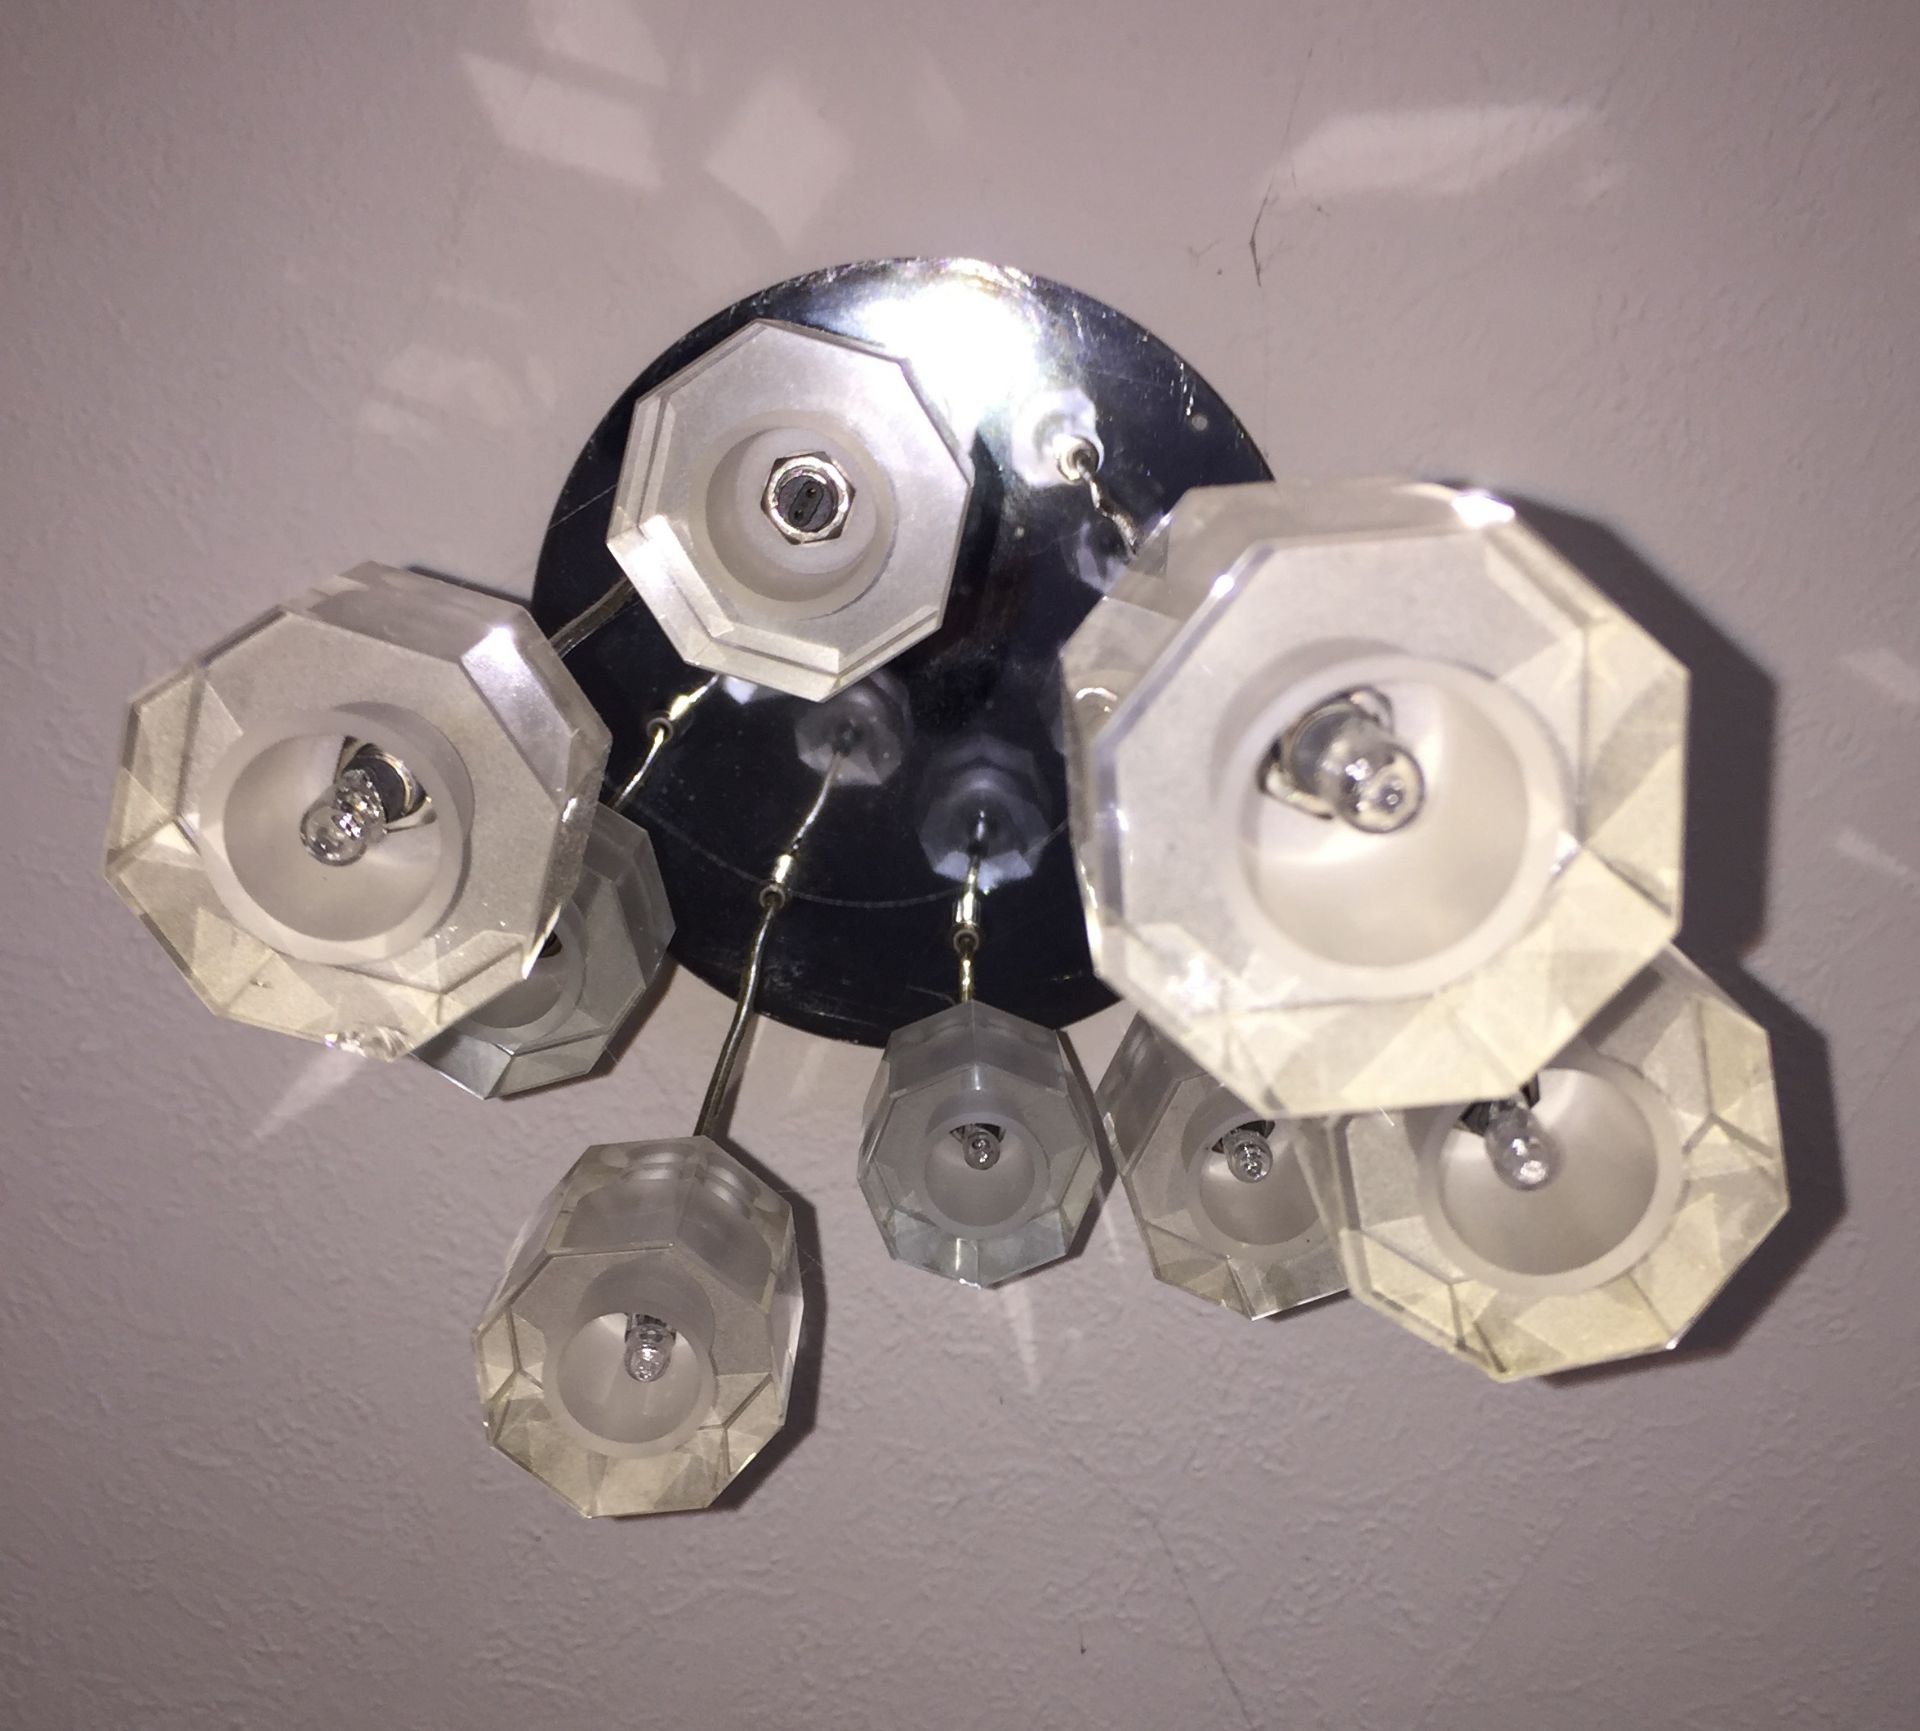 1 x Retro 60s Style Ceiling Light Fitting With Glass Shades And Chrome Ceiling Plate - Dimensions: - Image 3 of 5